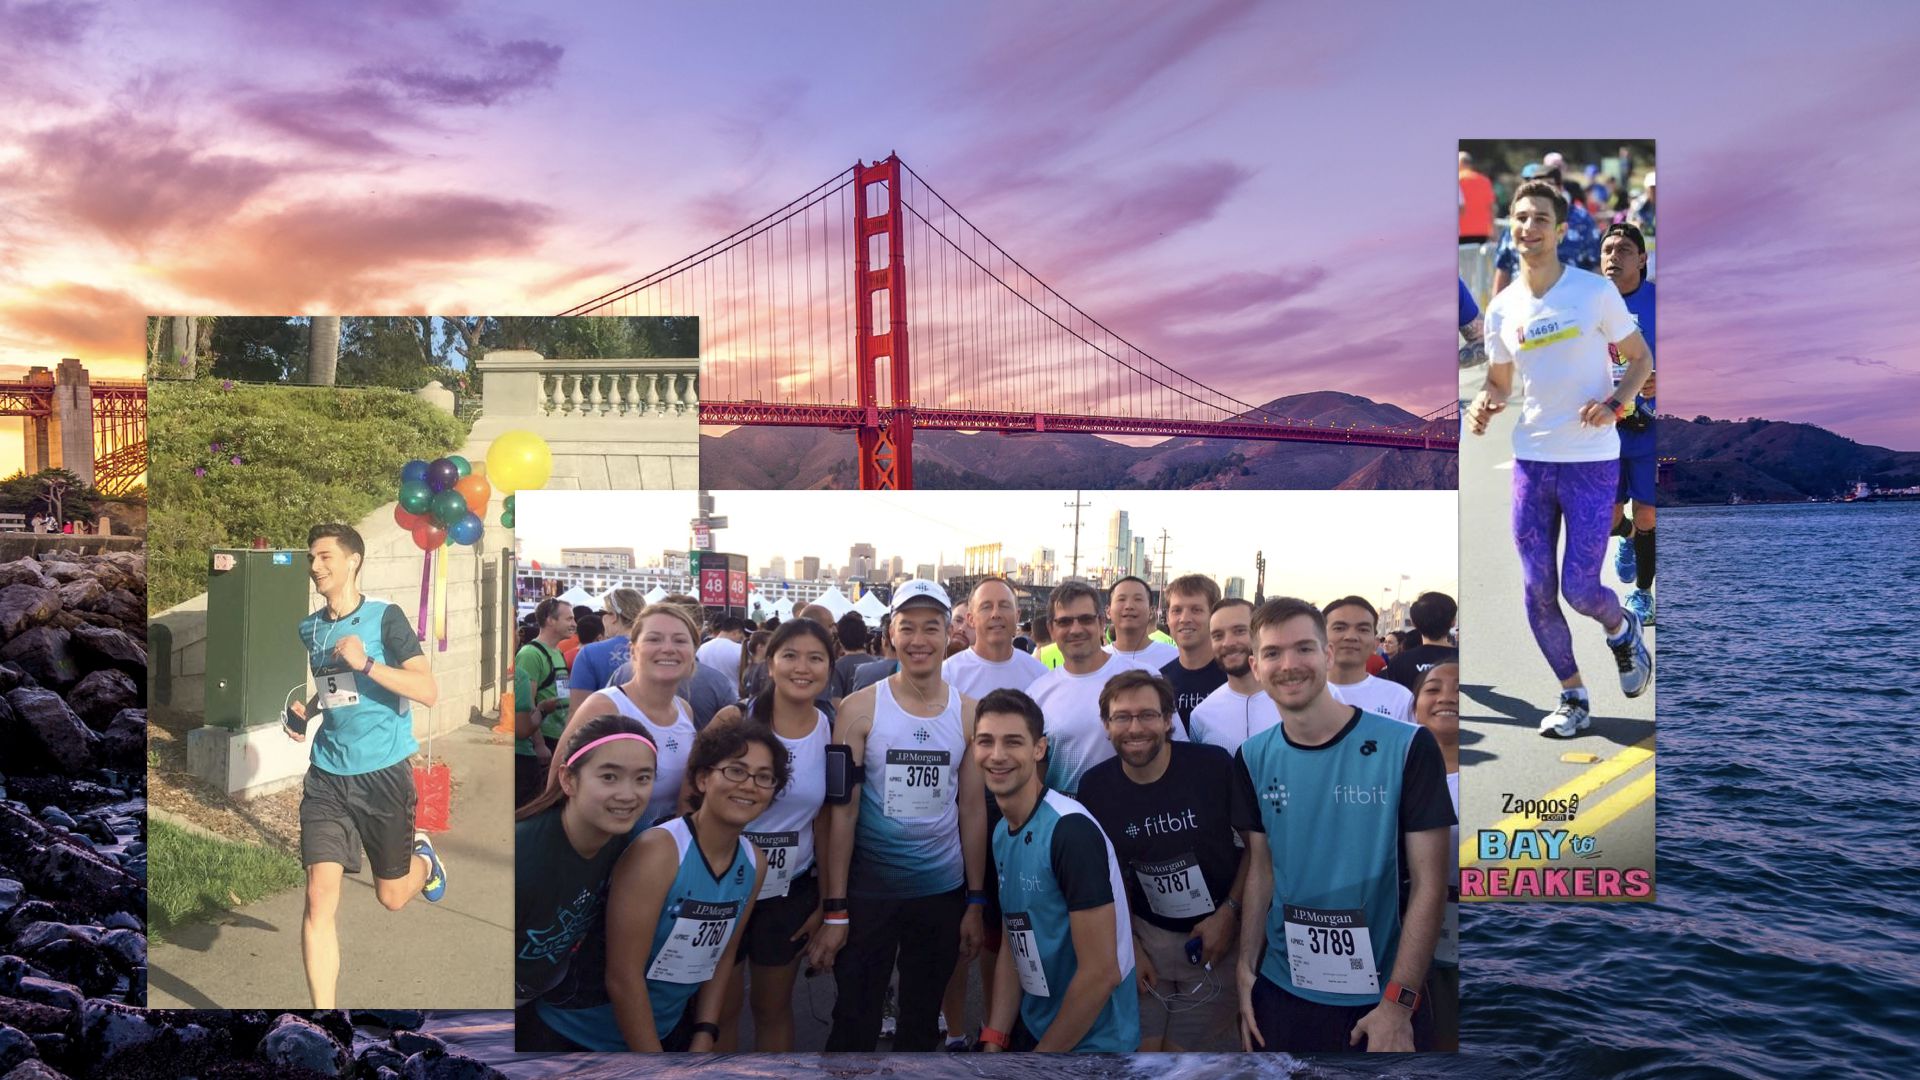 Background photo of the Golden Gate Bridge. Three photos of Jeremiah running races. The second photo is of multiple Fitbit employees before a race wearing shirts with the Fitbit logo.